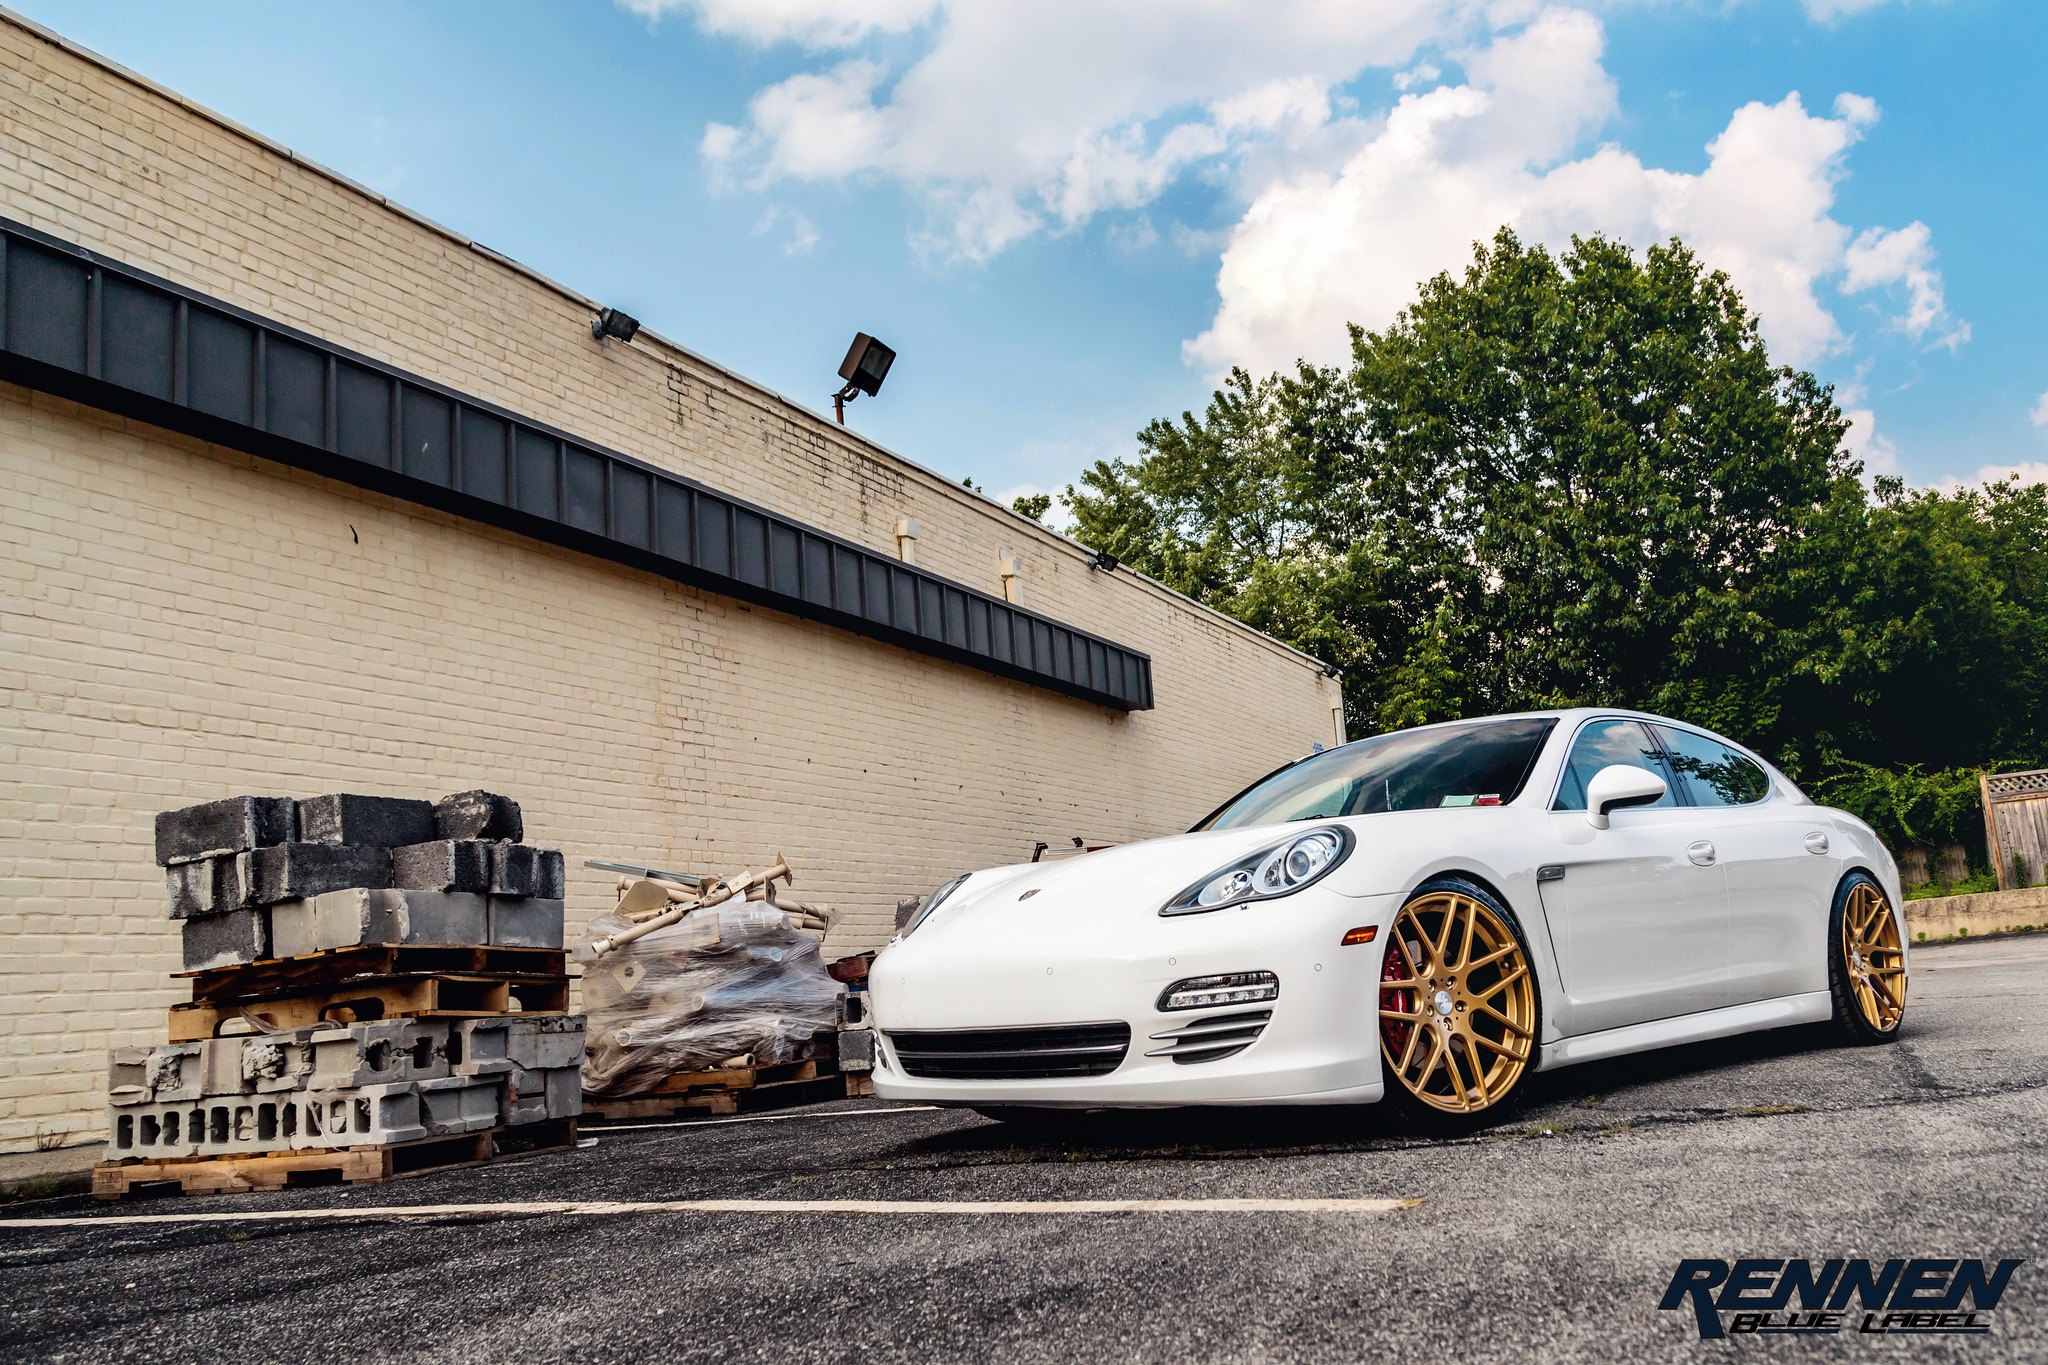 White Porsche Panamera with Crystal Clear Halo Headlights - Photo by Rennen International